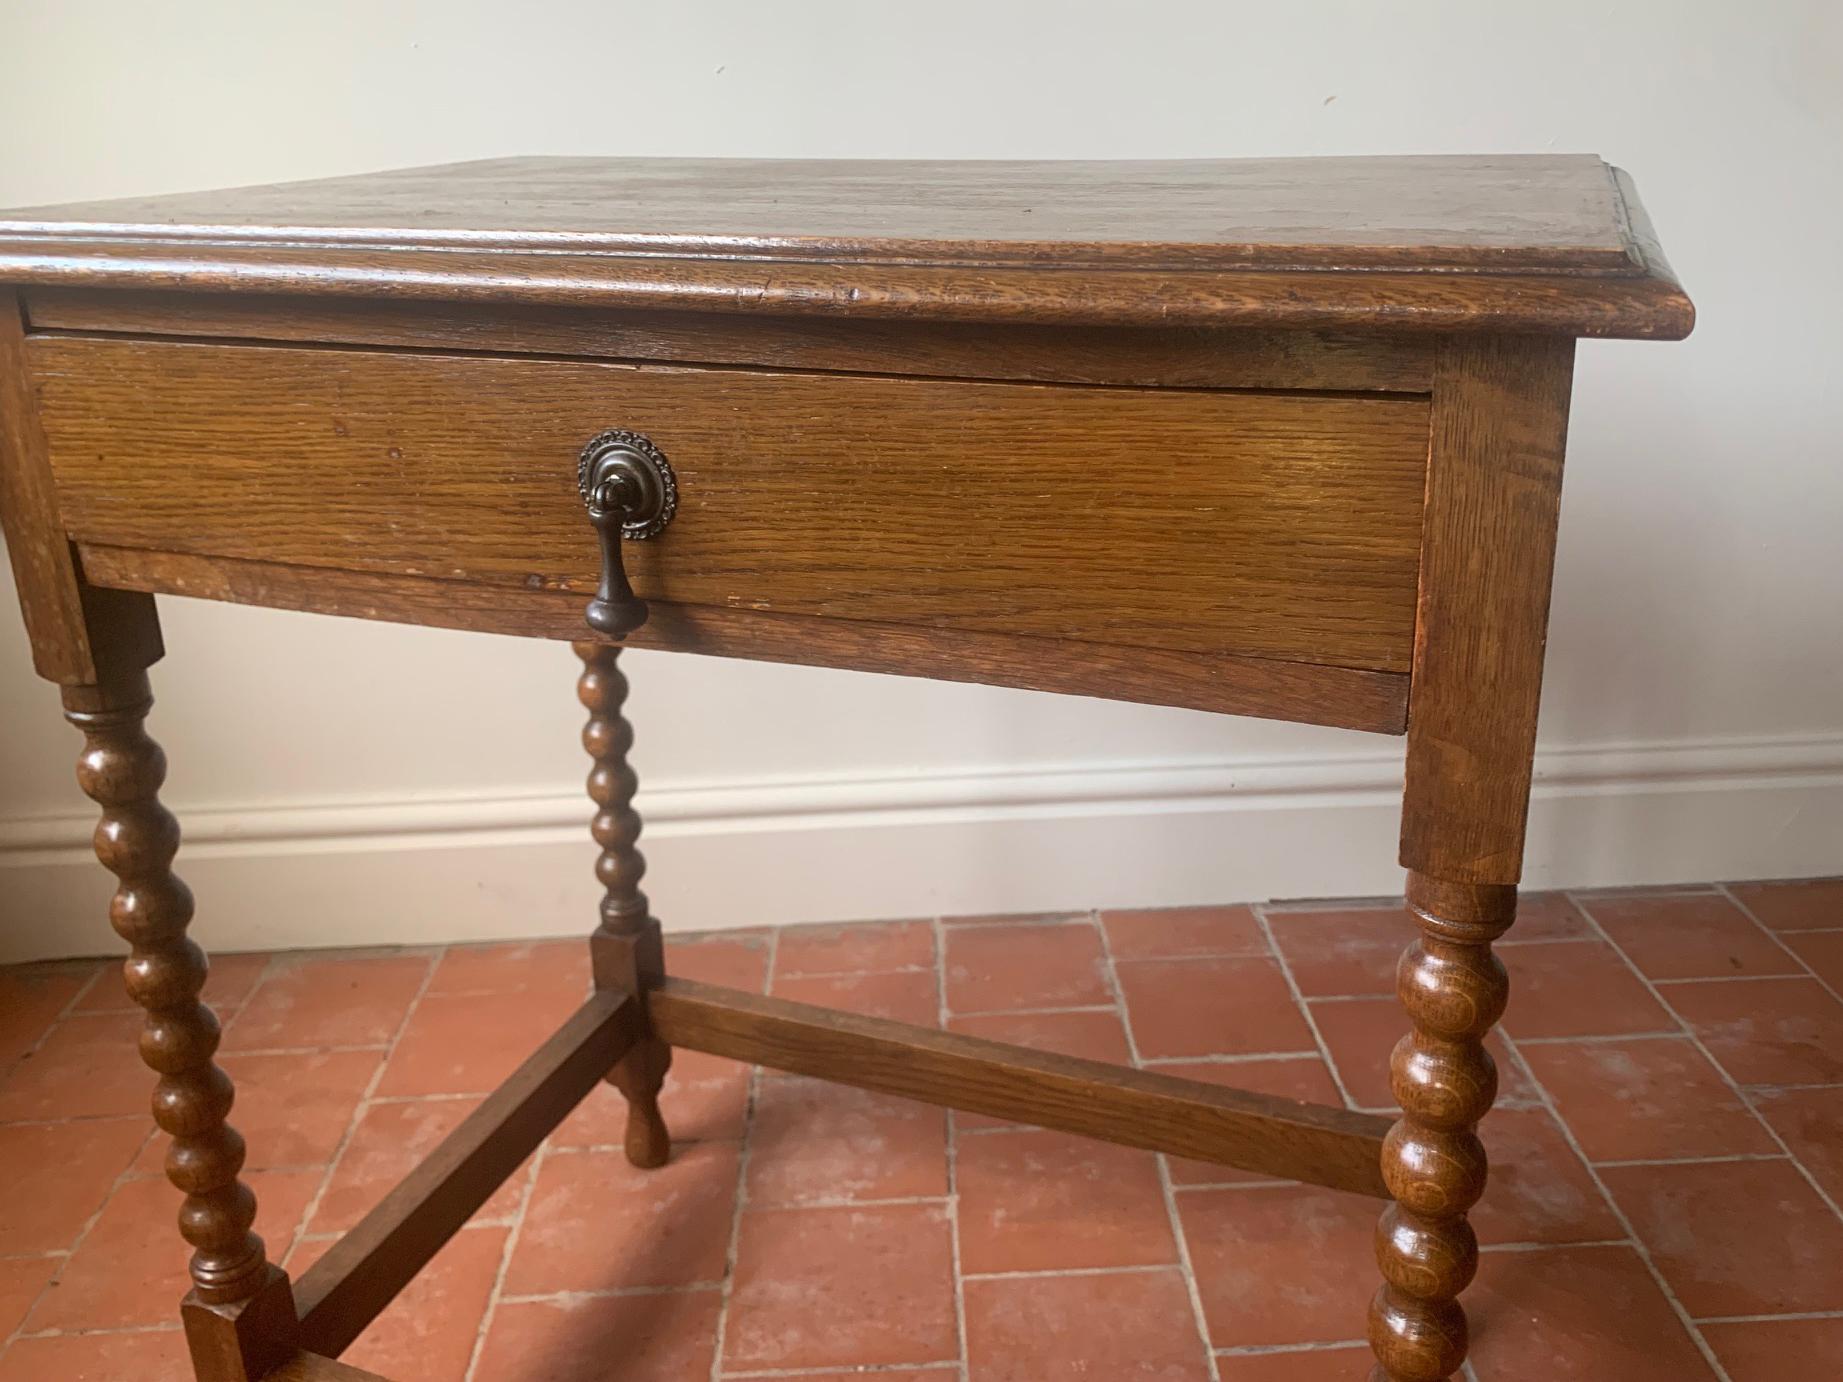 British Early 20th century barley twist solid oak hall table / side table